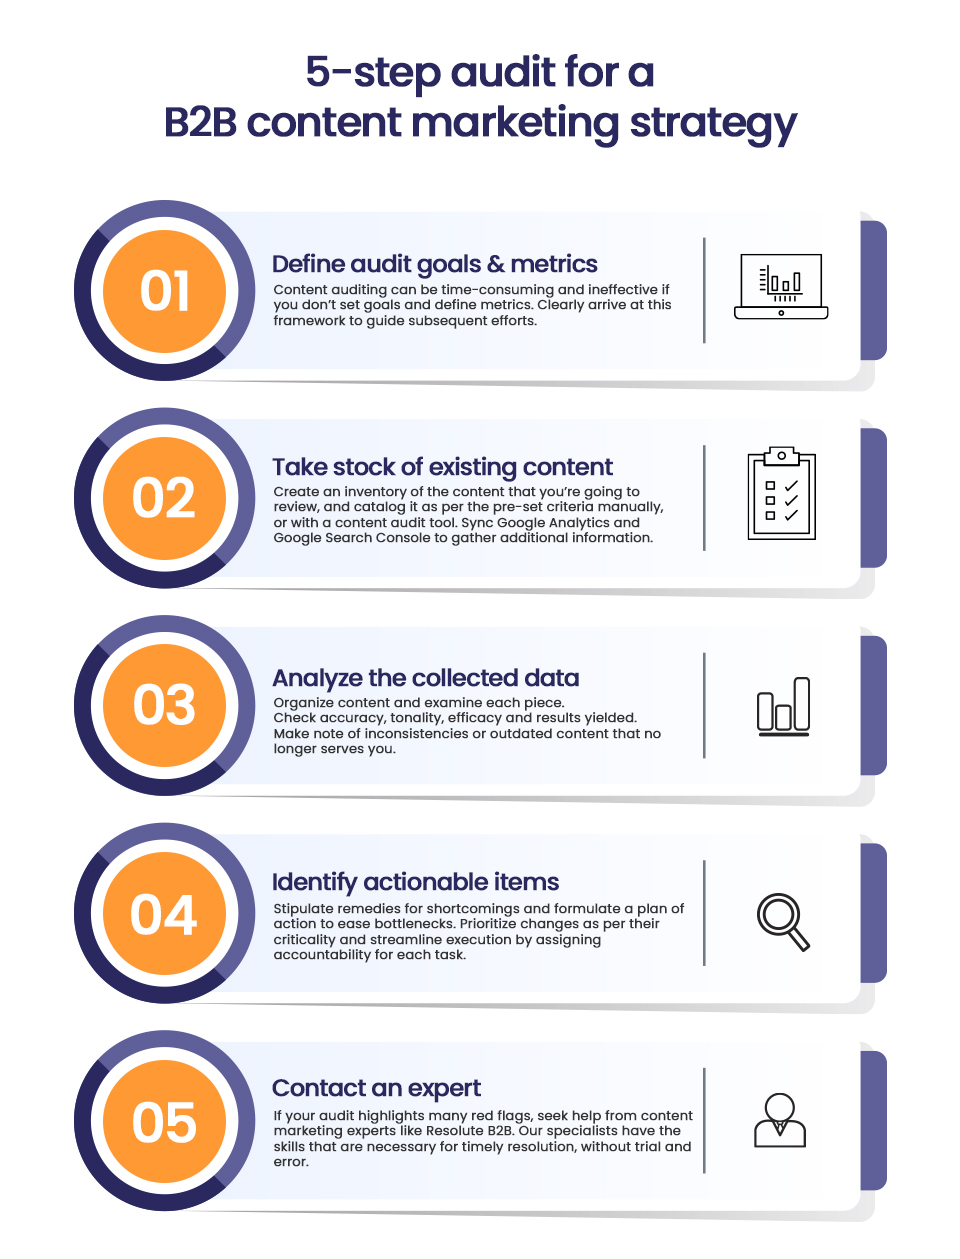 5 step audit for a B2B content marketing strategy